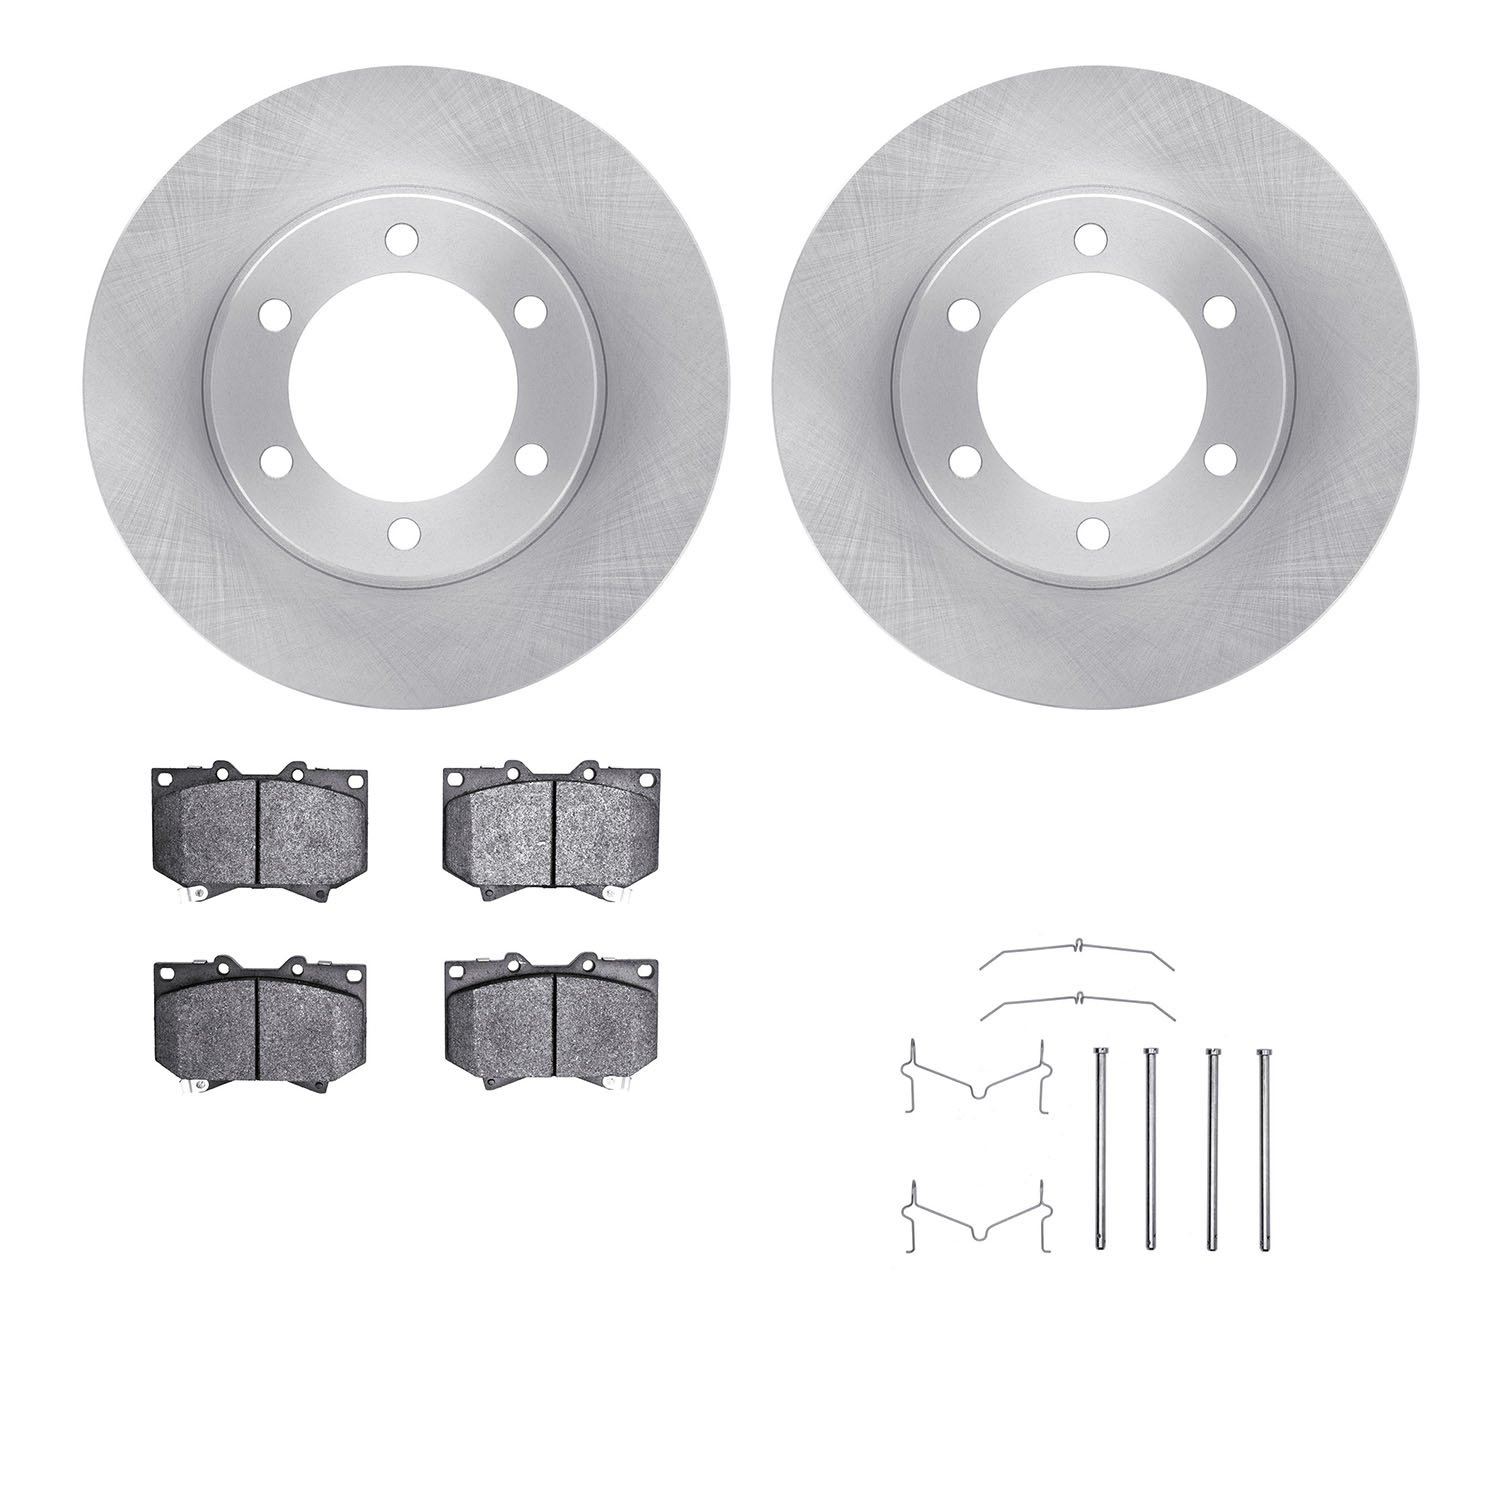 6412-76037 Brake Rotors with Ultimate-Duty Brake Pads Kit & Hardware, 2000-2002 Lexus/Toyota/Scion, Position: Front